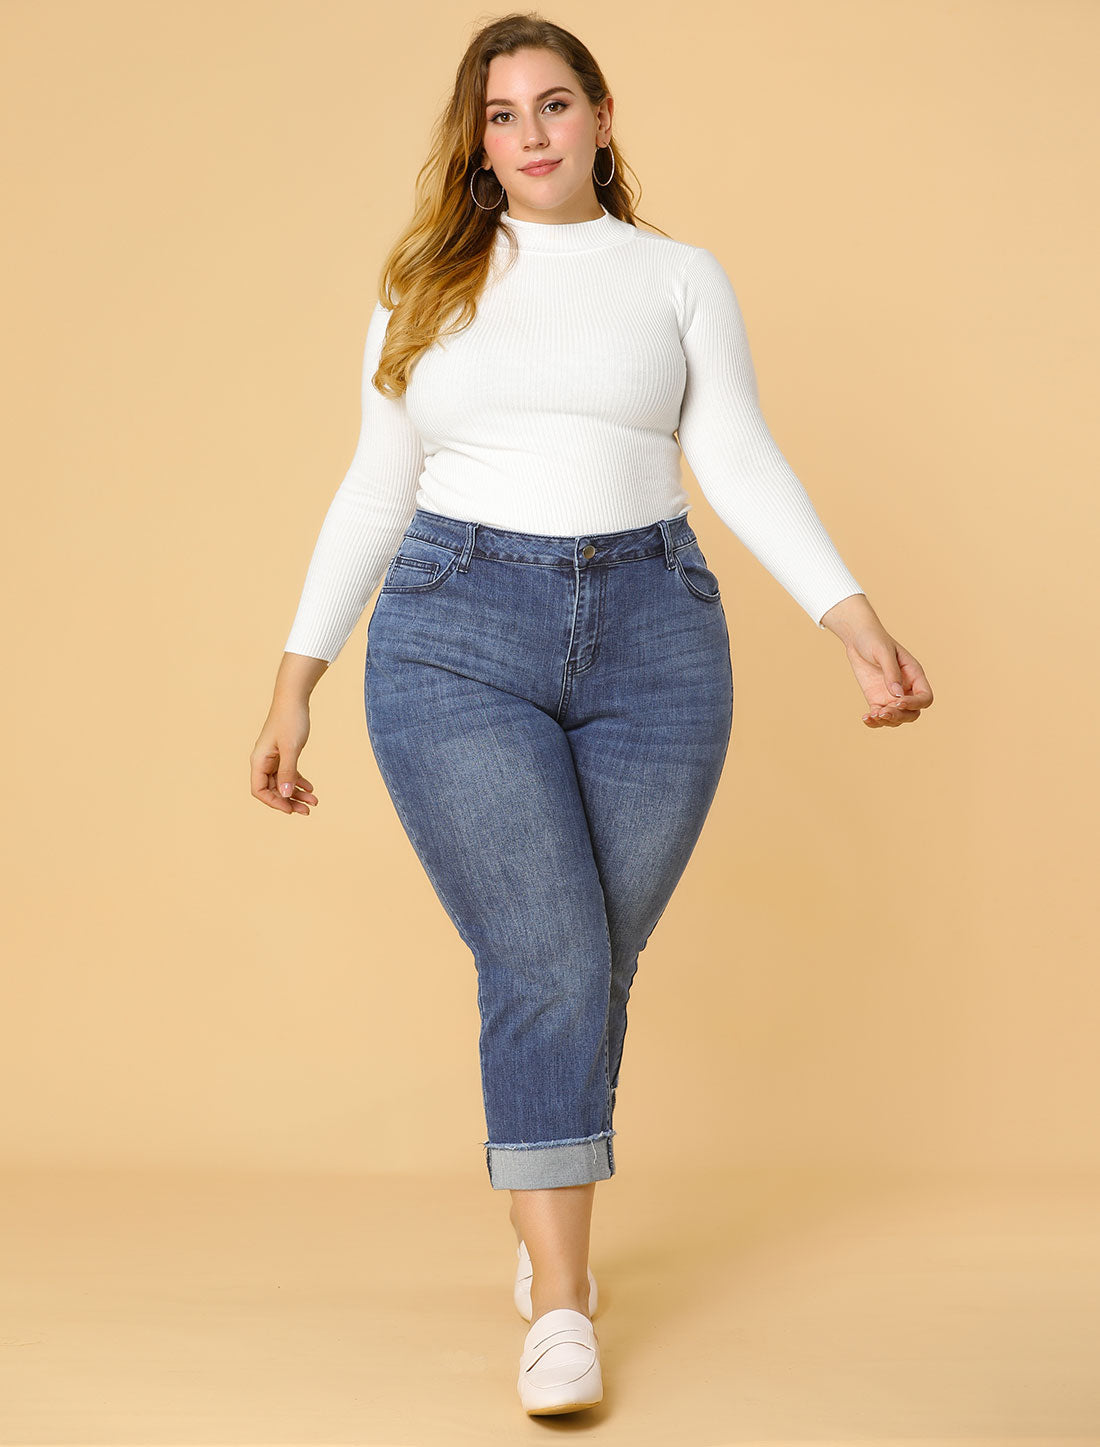 Bublédon Plus Size Jean Stretch Rolled Mid Rise Washed Skinny Jeans